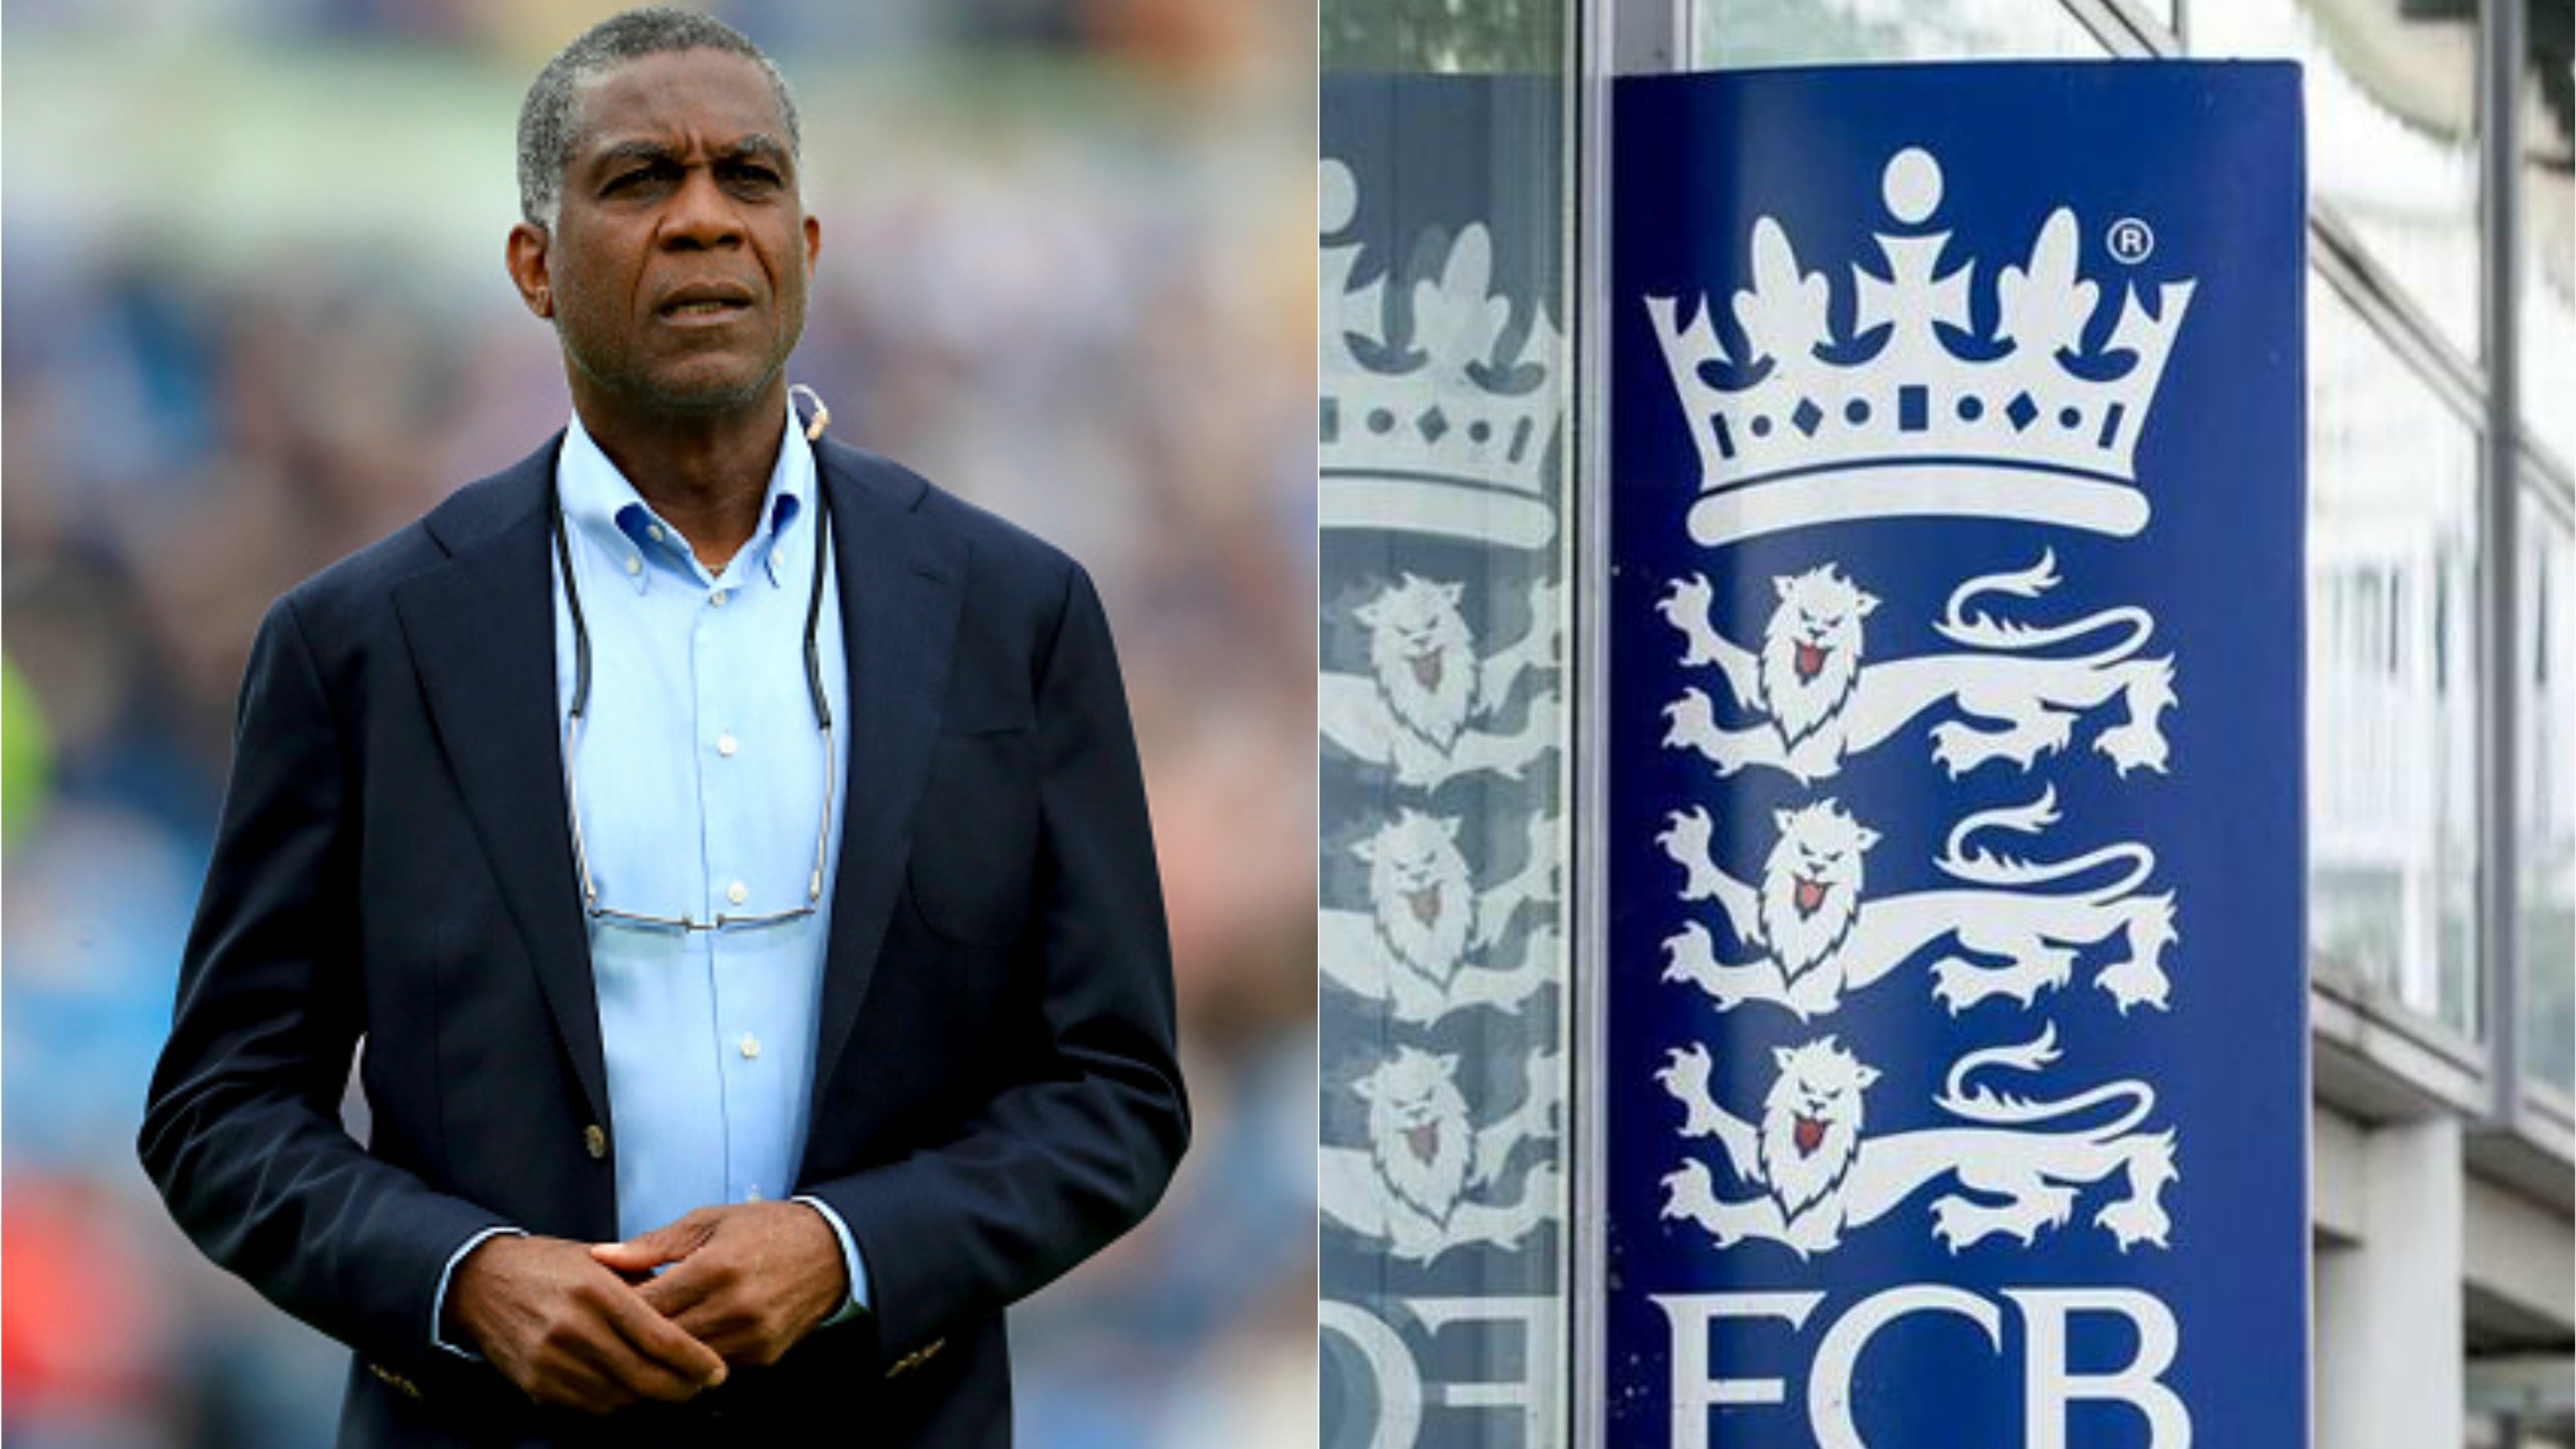 ECB reacts to Michael Holding's criticism over BLM movement